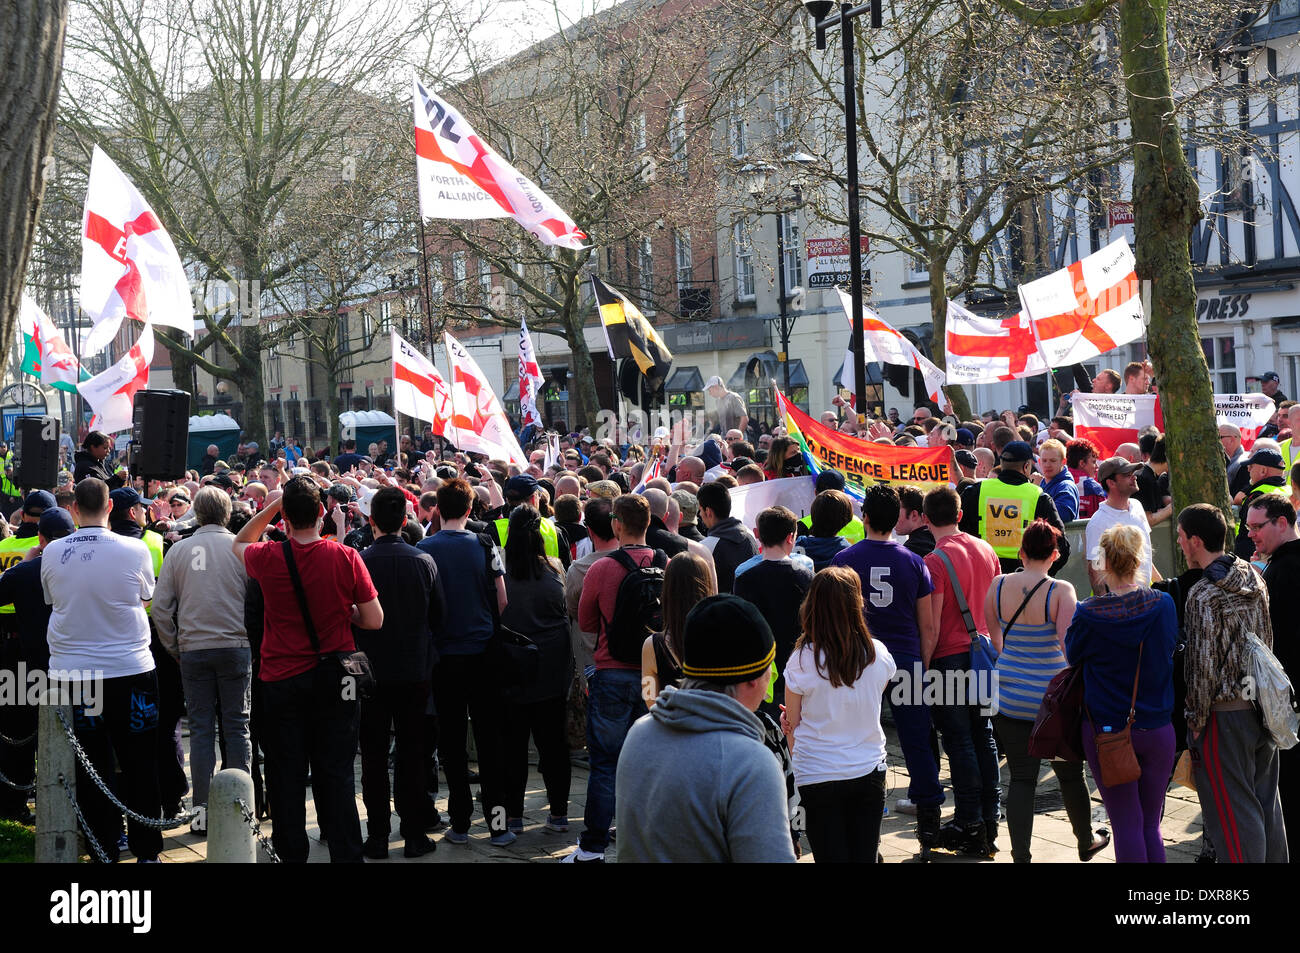 Peterborough, Cambridgeshire, UK. 29th March 2014.Members of the EDL marched through Peterborough this afternoon ,A crowd of around three hundred took part starting at the peacock public house on London Road.They marched in to the city center were speeches where made ,One man was arrested on suspicion public order offence.  A counter march also took place early in the day by Peterborough Trade Union Council. Credit:  Ian Francis/Alamy Live News Stock Photo